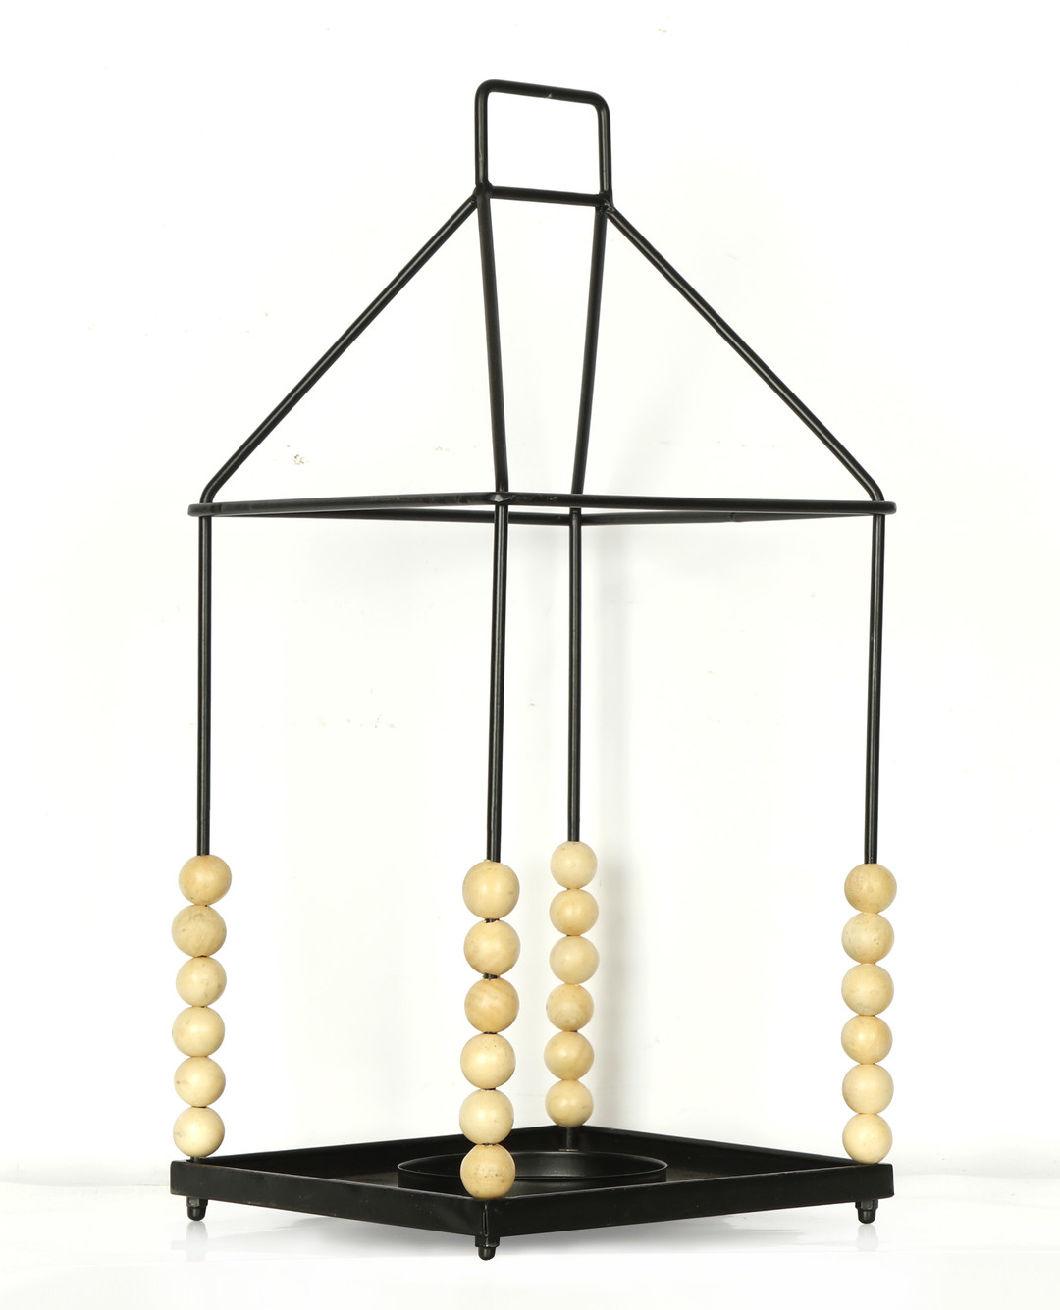 Decorative Antique Black Gold Metal Lantern Candle Holders for Candles